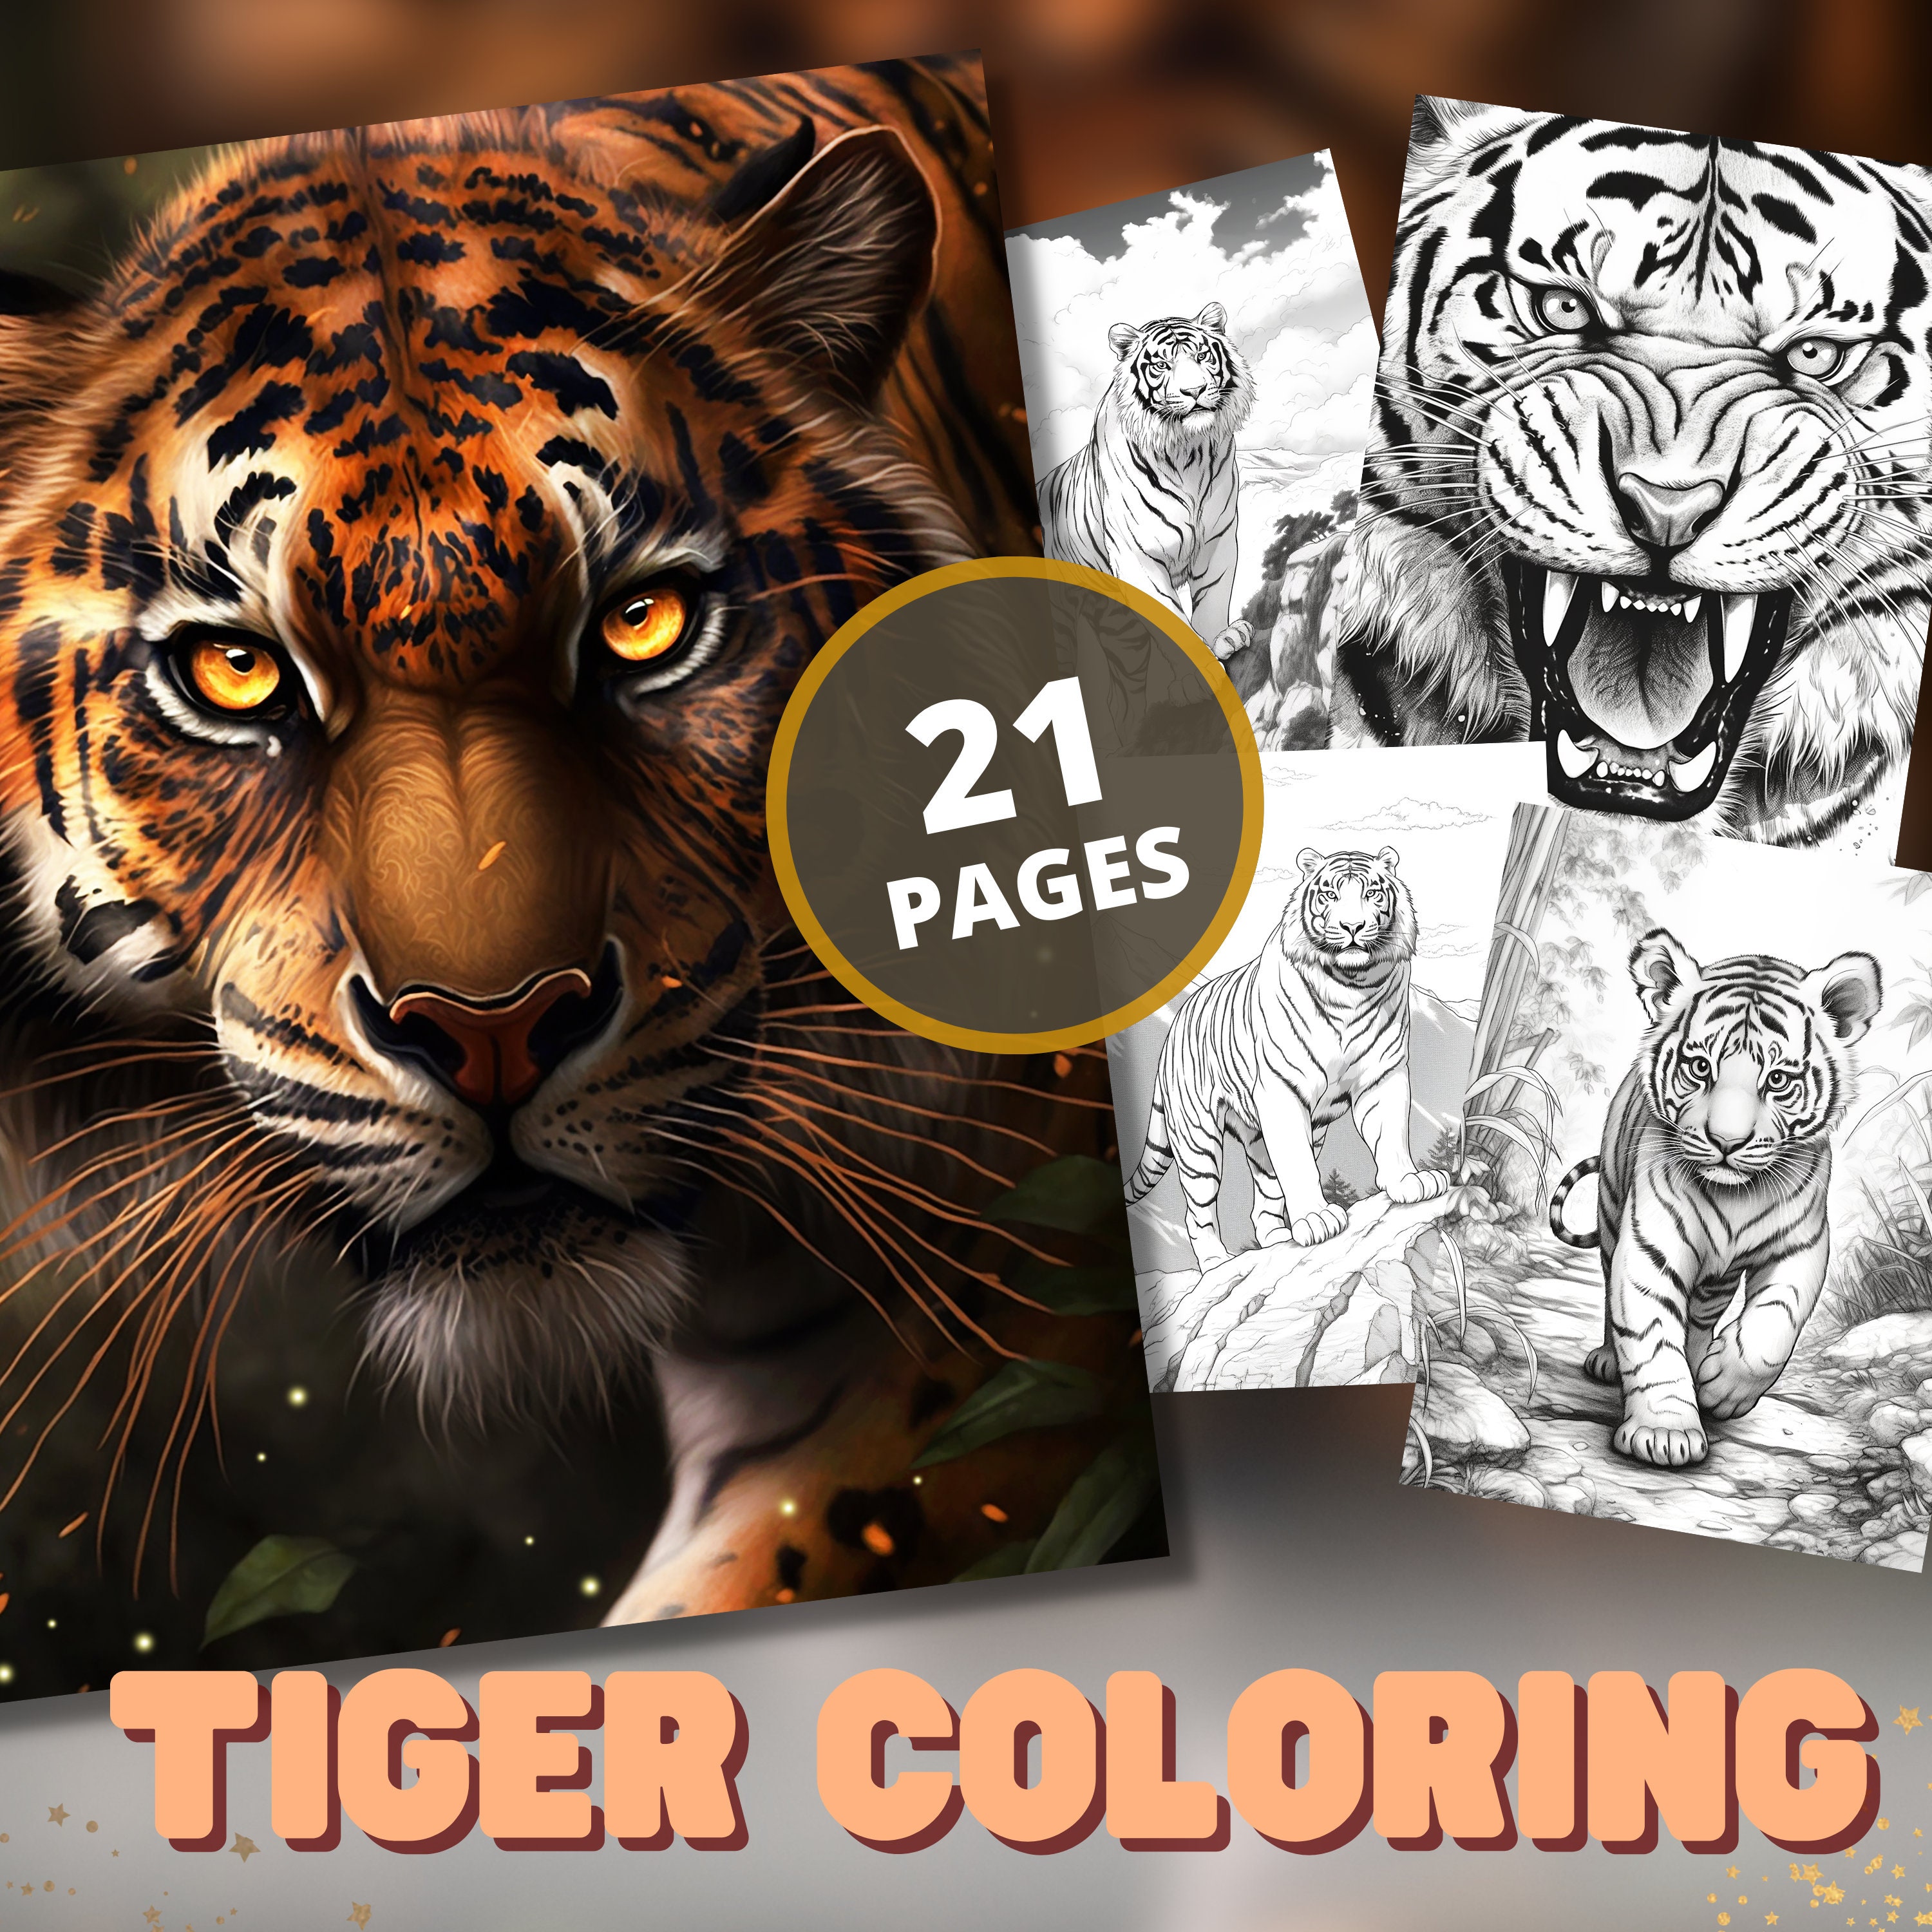 Realistic tigers coloring book adult and kids coloring grayscale instant pdf download for kids boys girls animal lovers